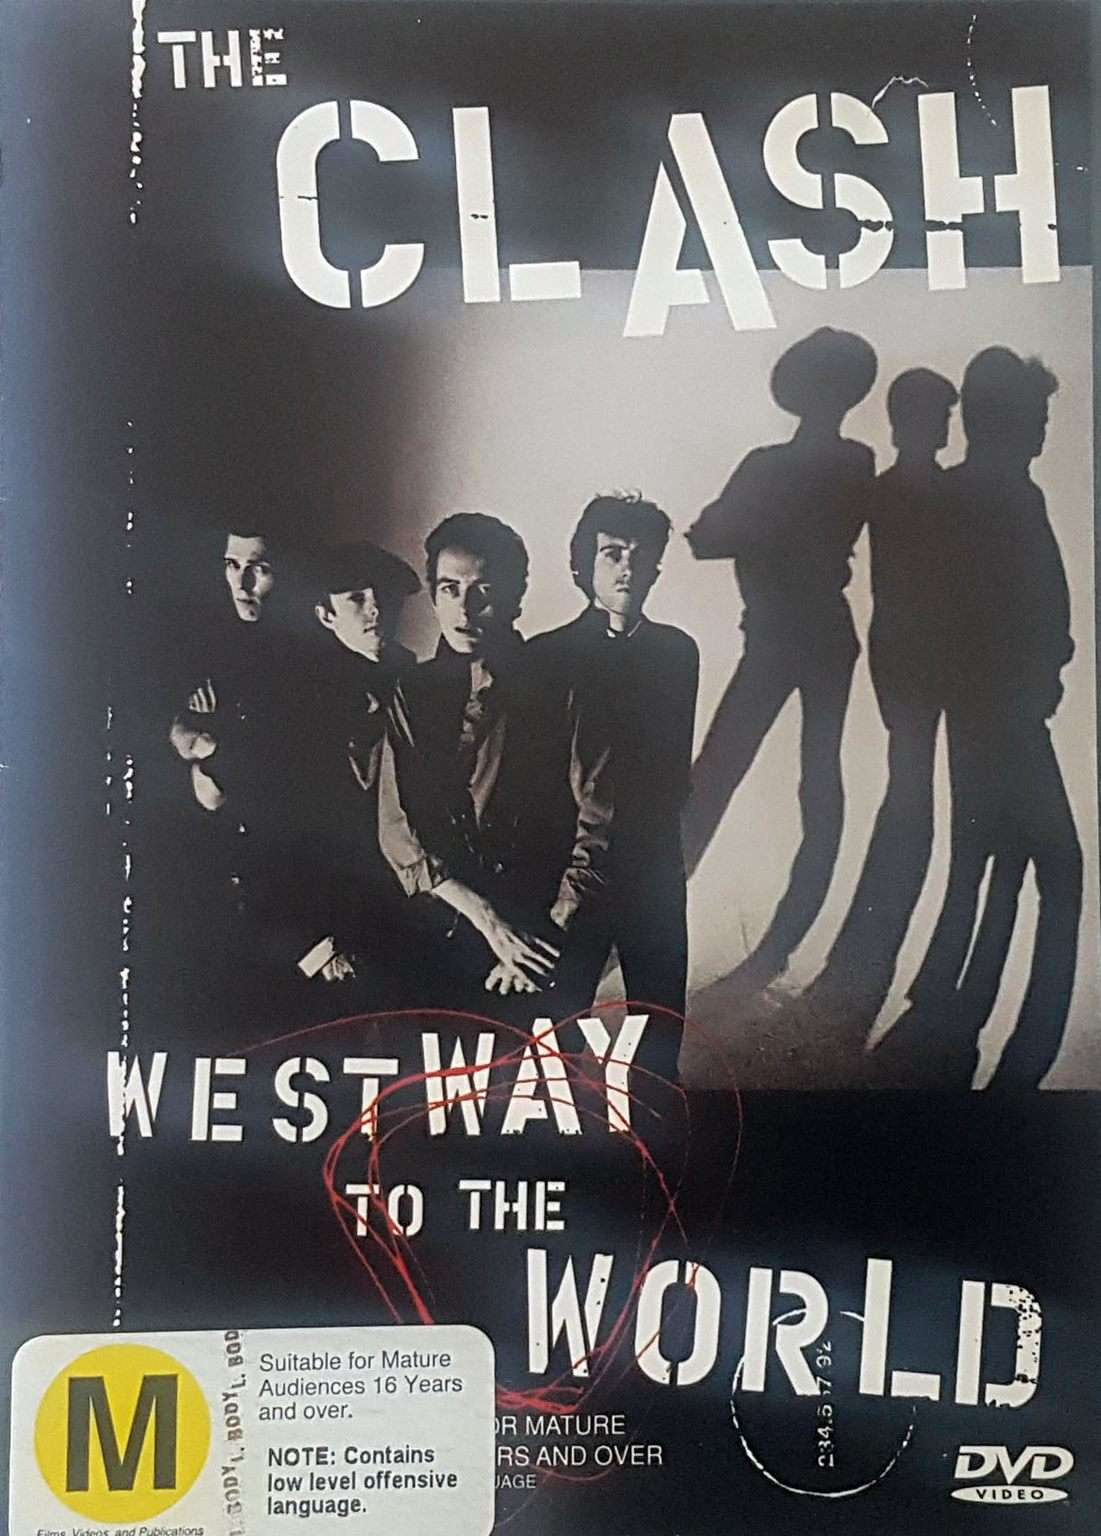 The Clash: West Way to the World